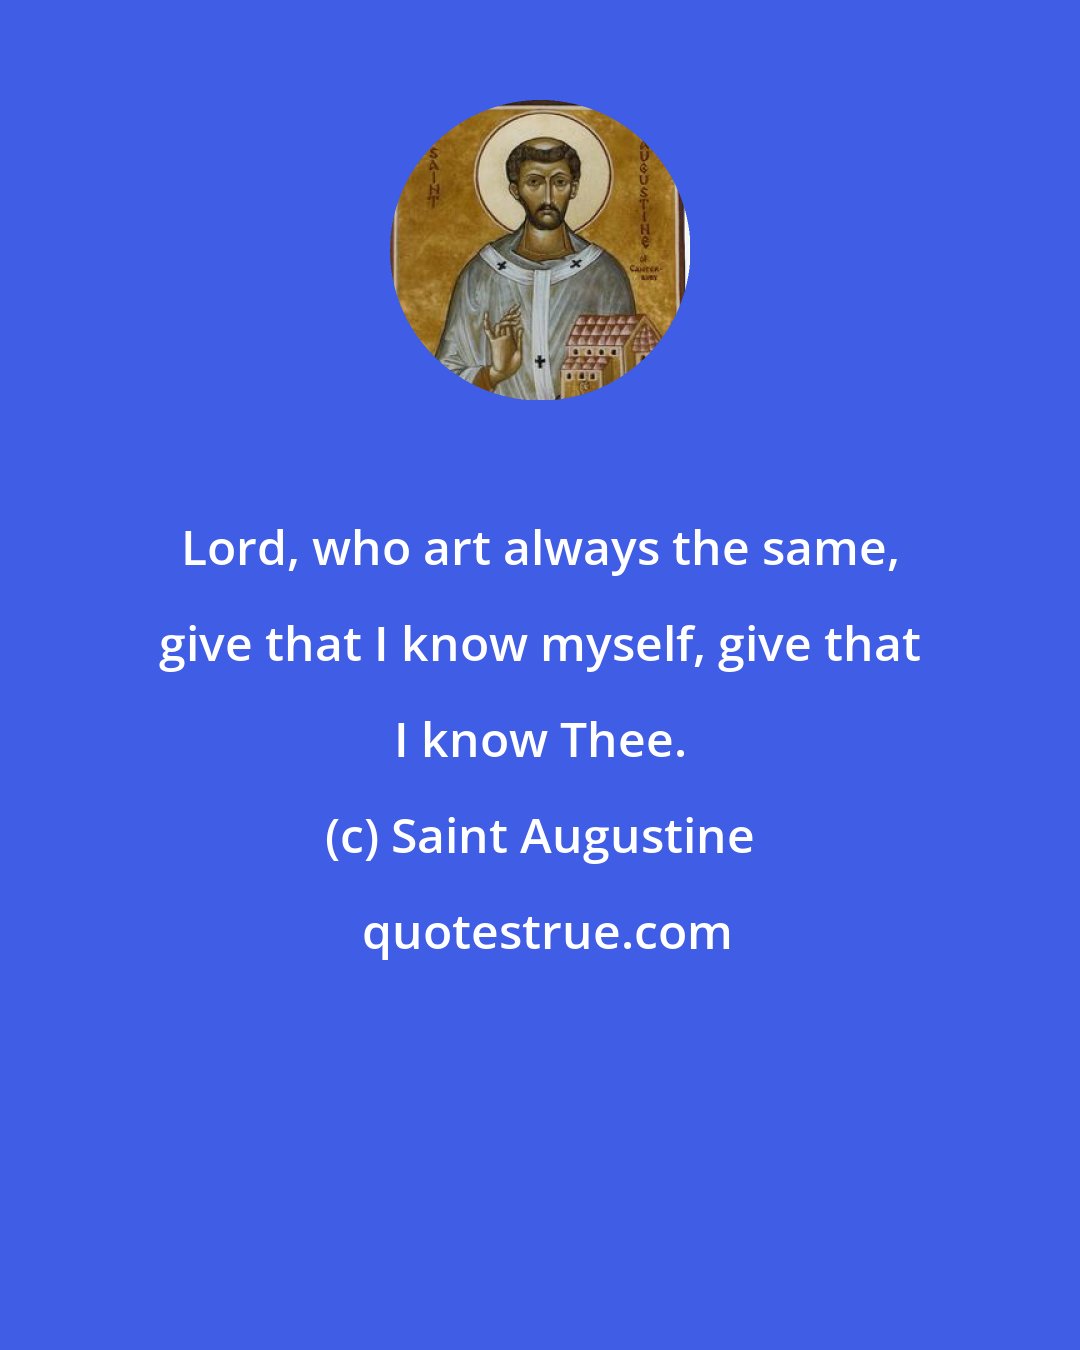 Saint Augustine: Lord, who art always the same, give that I know myself, give that I know Thee.